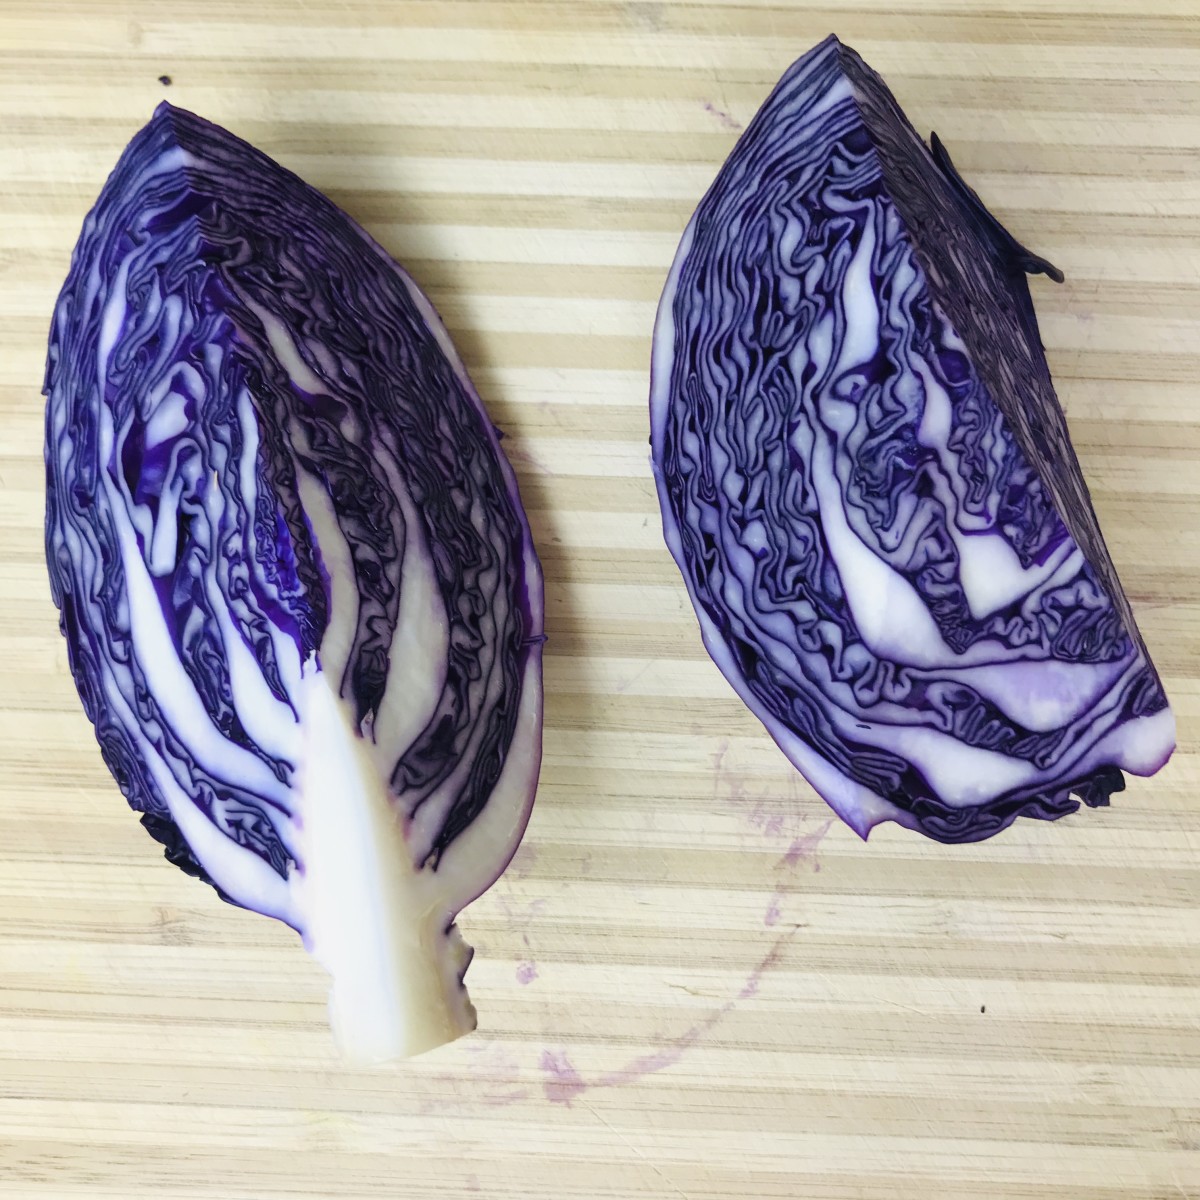 To shred the cabbage, start by quartering it. Take each quarter and remove the core by slicing at 45 degree angle beginning in the middle and moving toward the bottom.